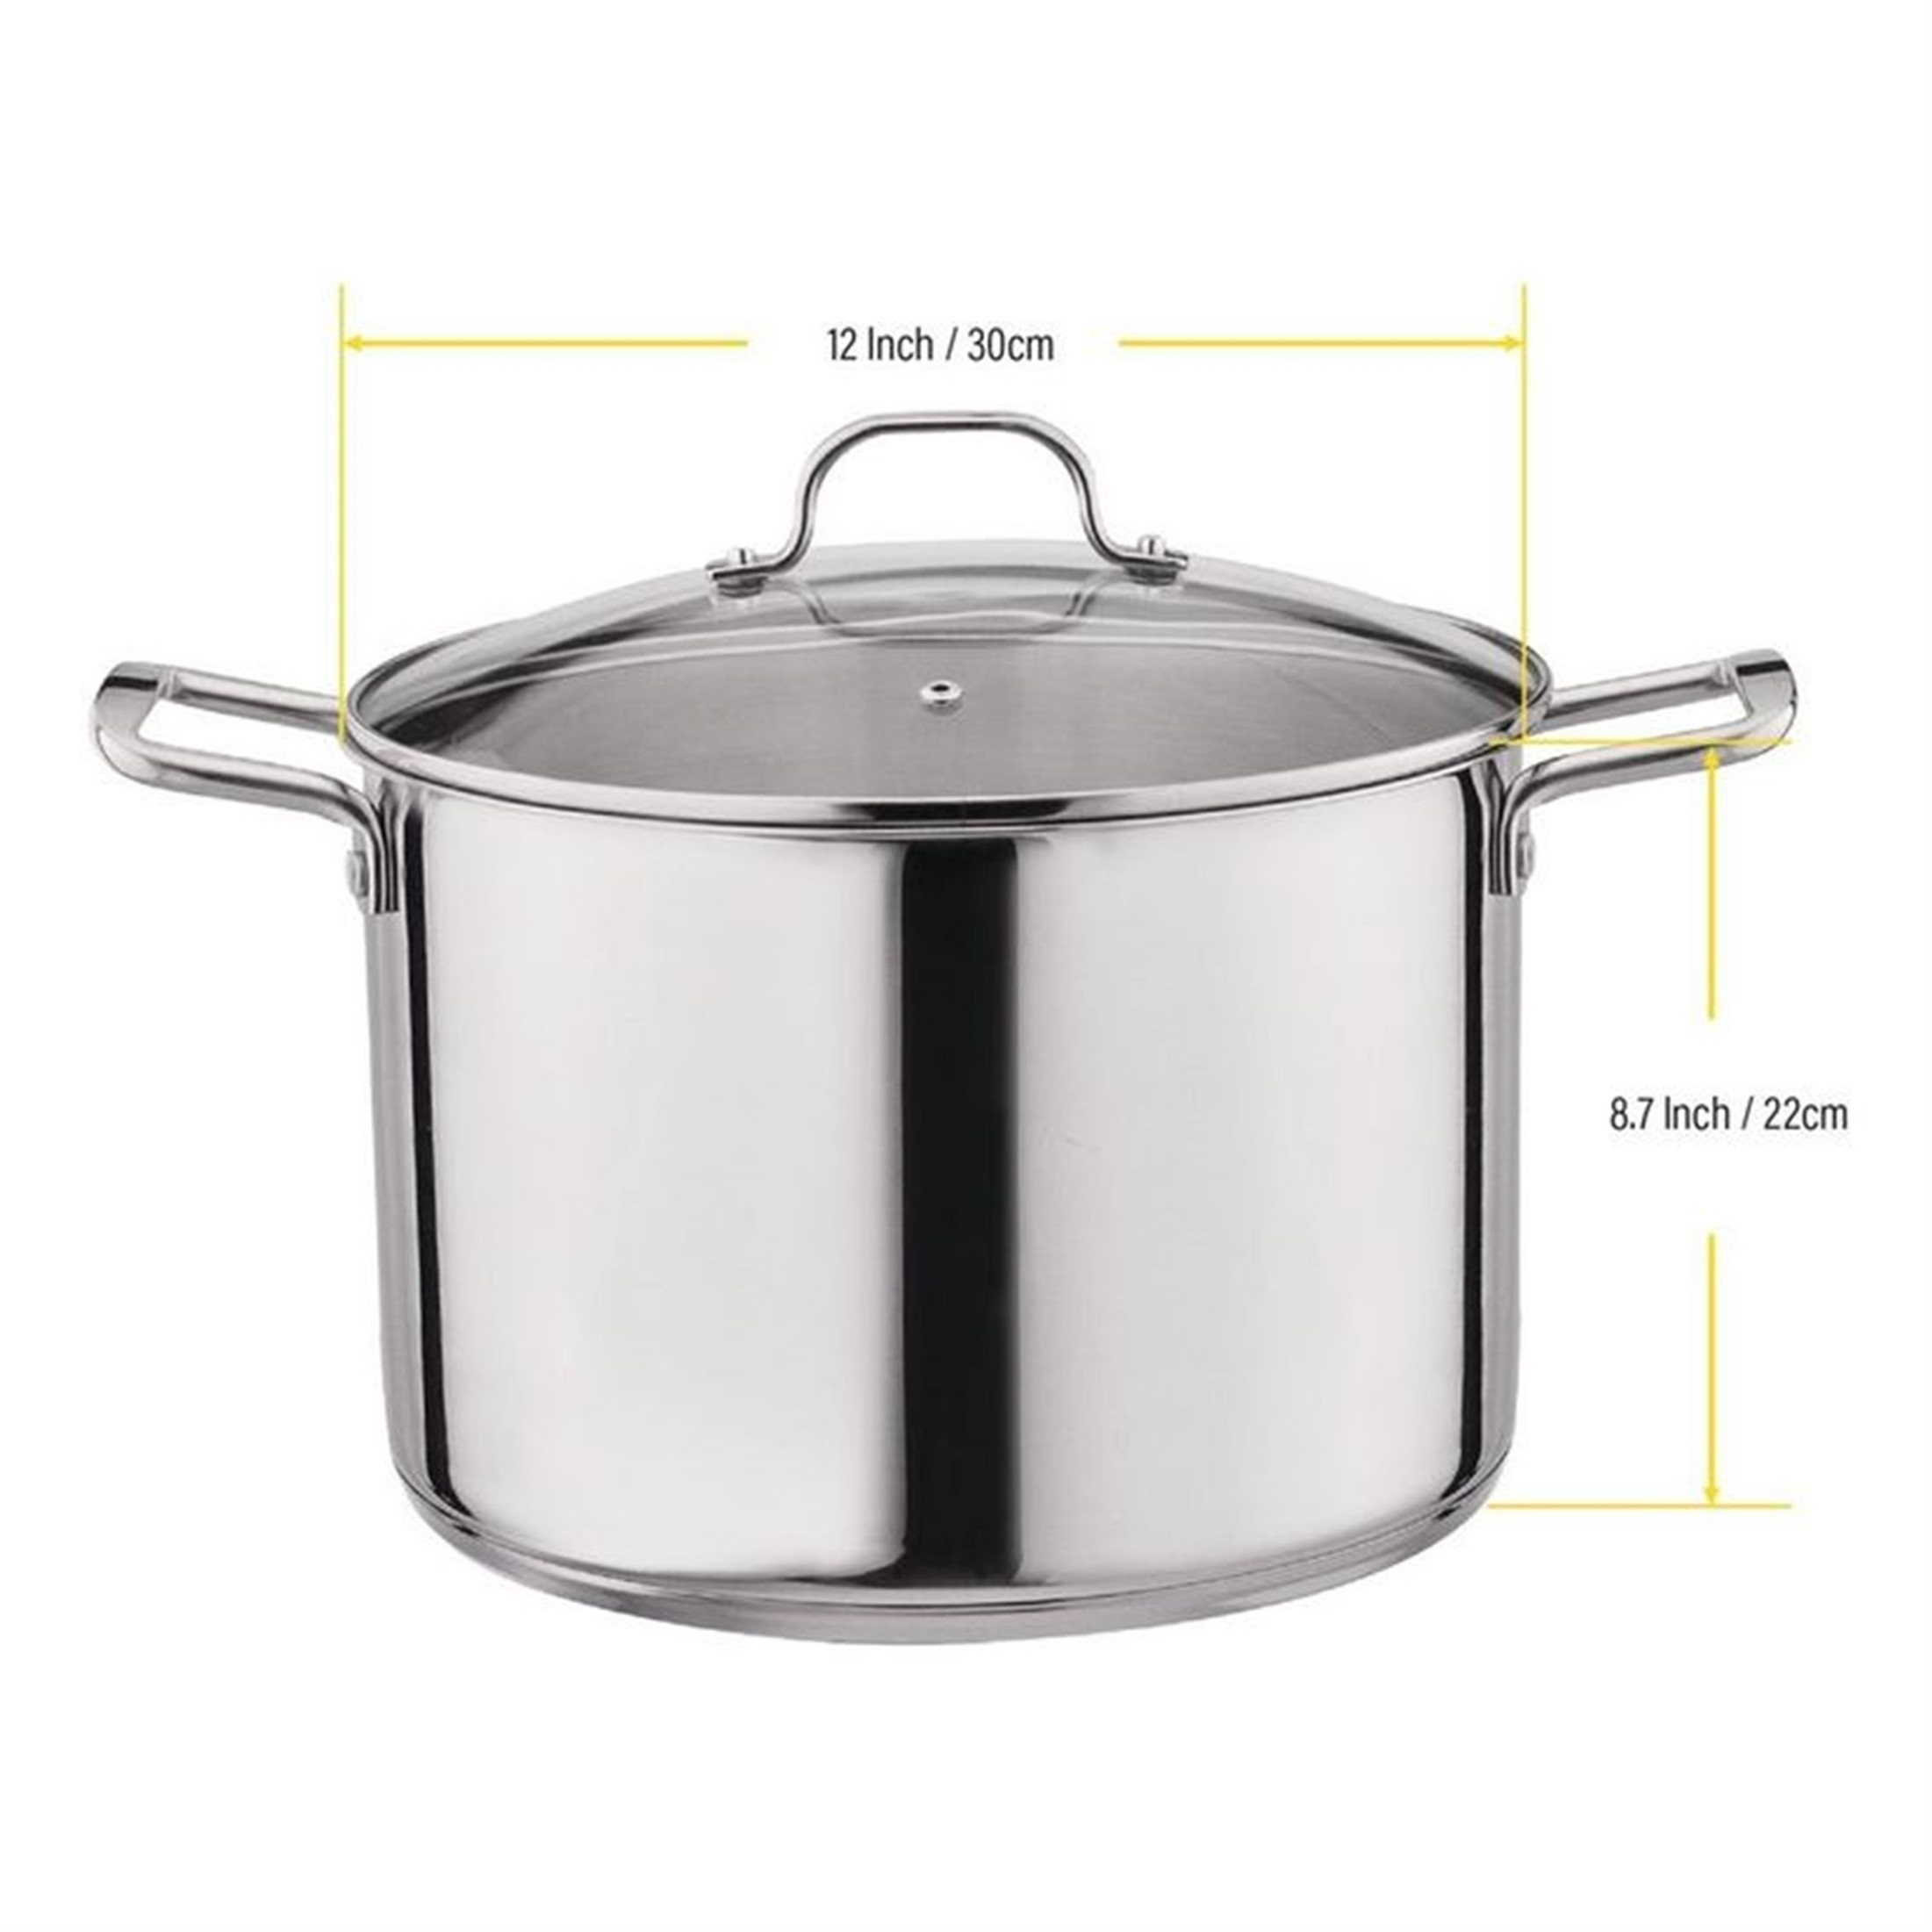 Gourmet Edge Stock Pot - Stainless Steel Cooking Pot with Lid, Silver- 16-Quart